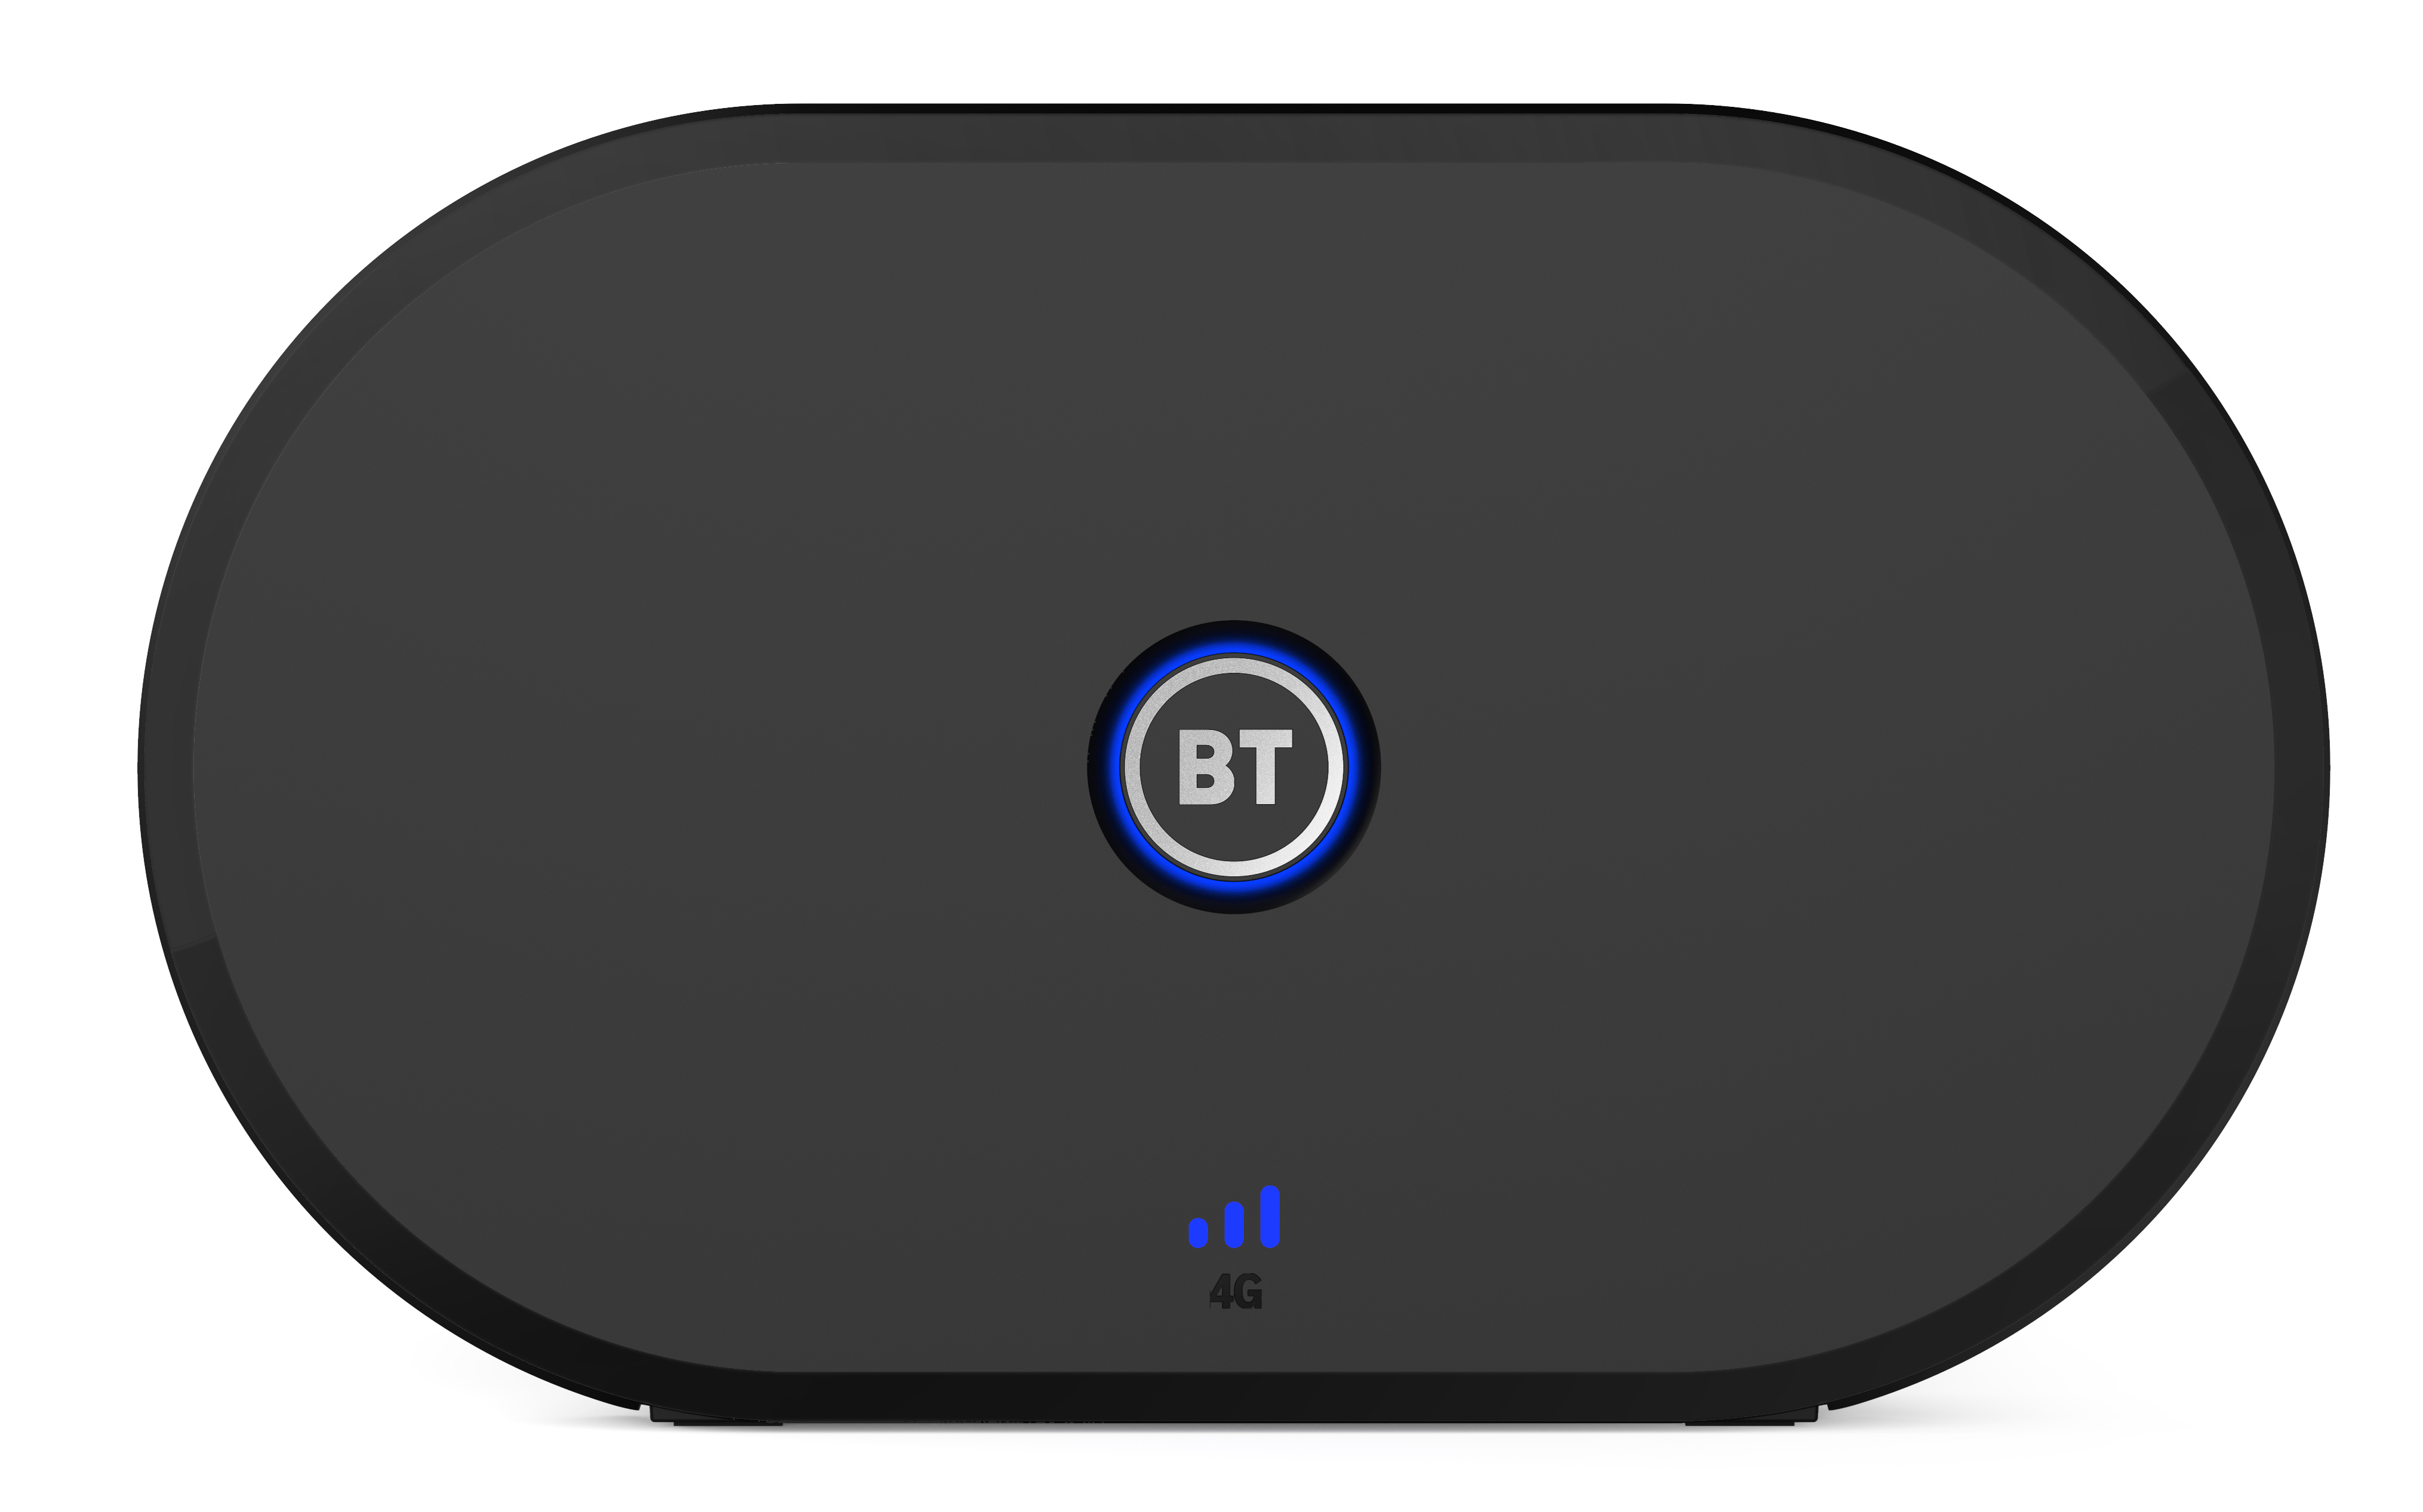 BT combines home wifi with EE network to create new ‘unbreakable' home